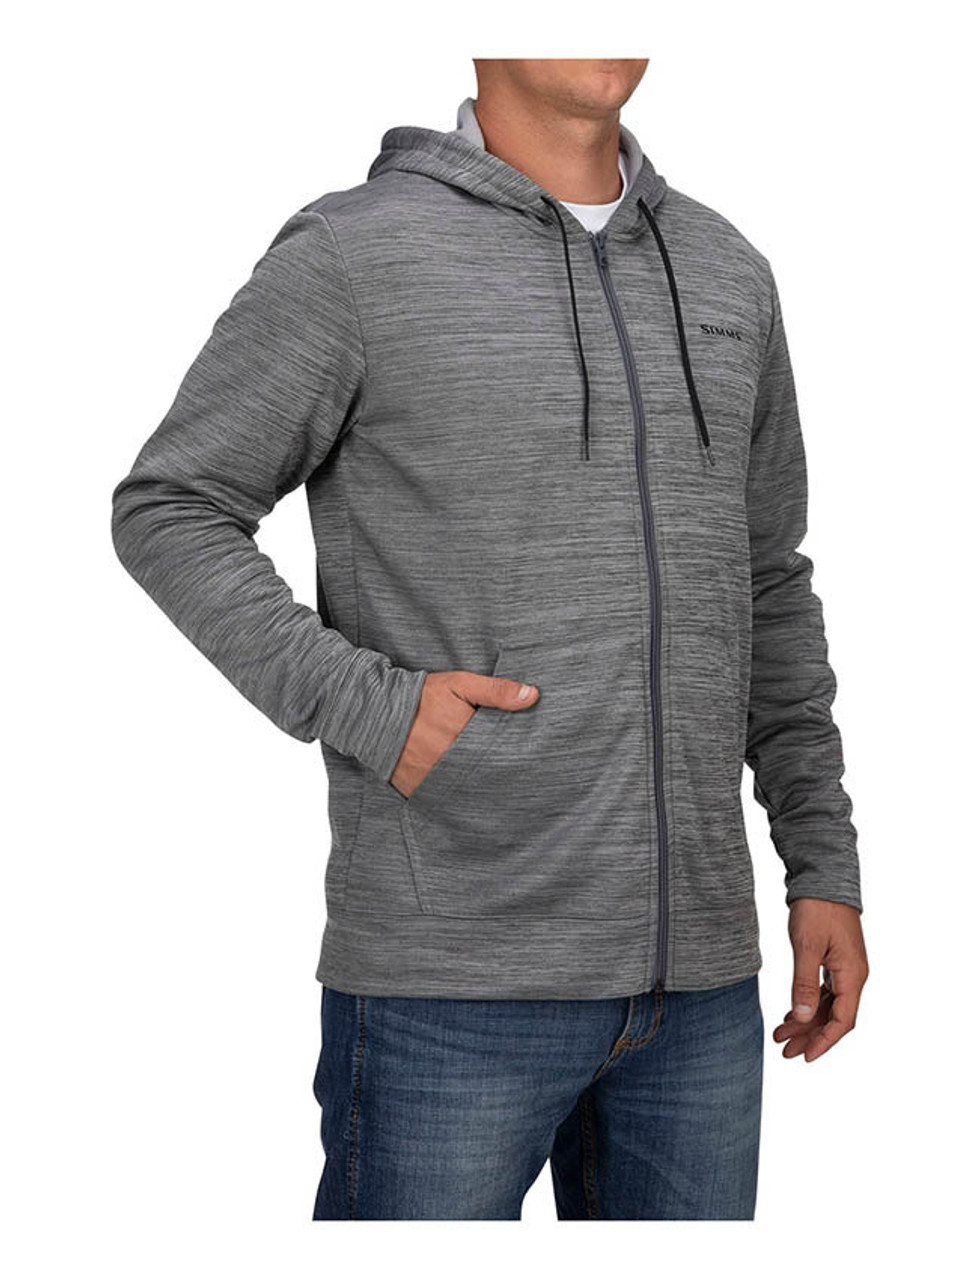 Simms Challenger Hoody - Full Zip (13281) - Carbon Heather (Small 